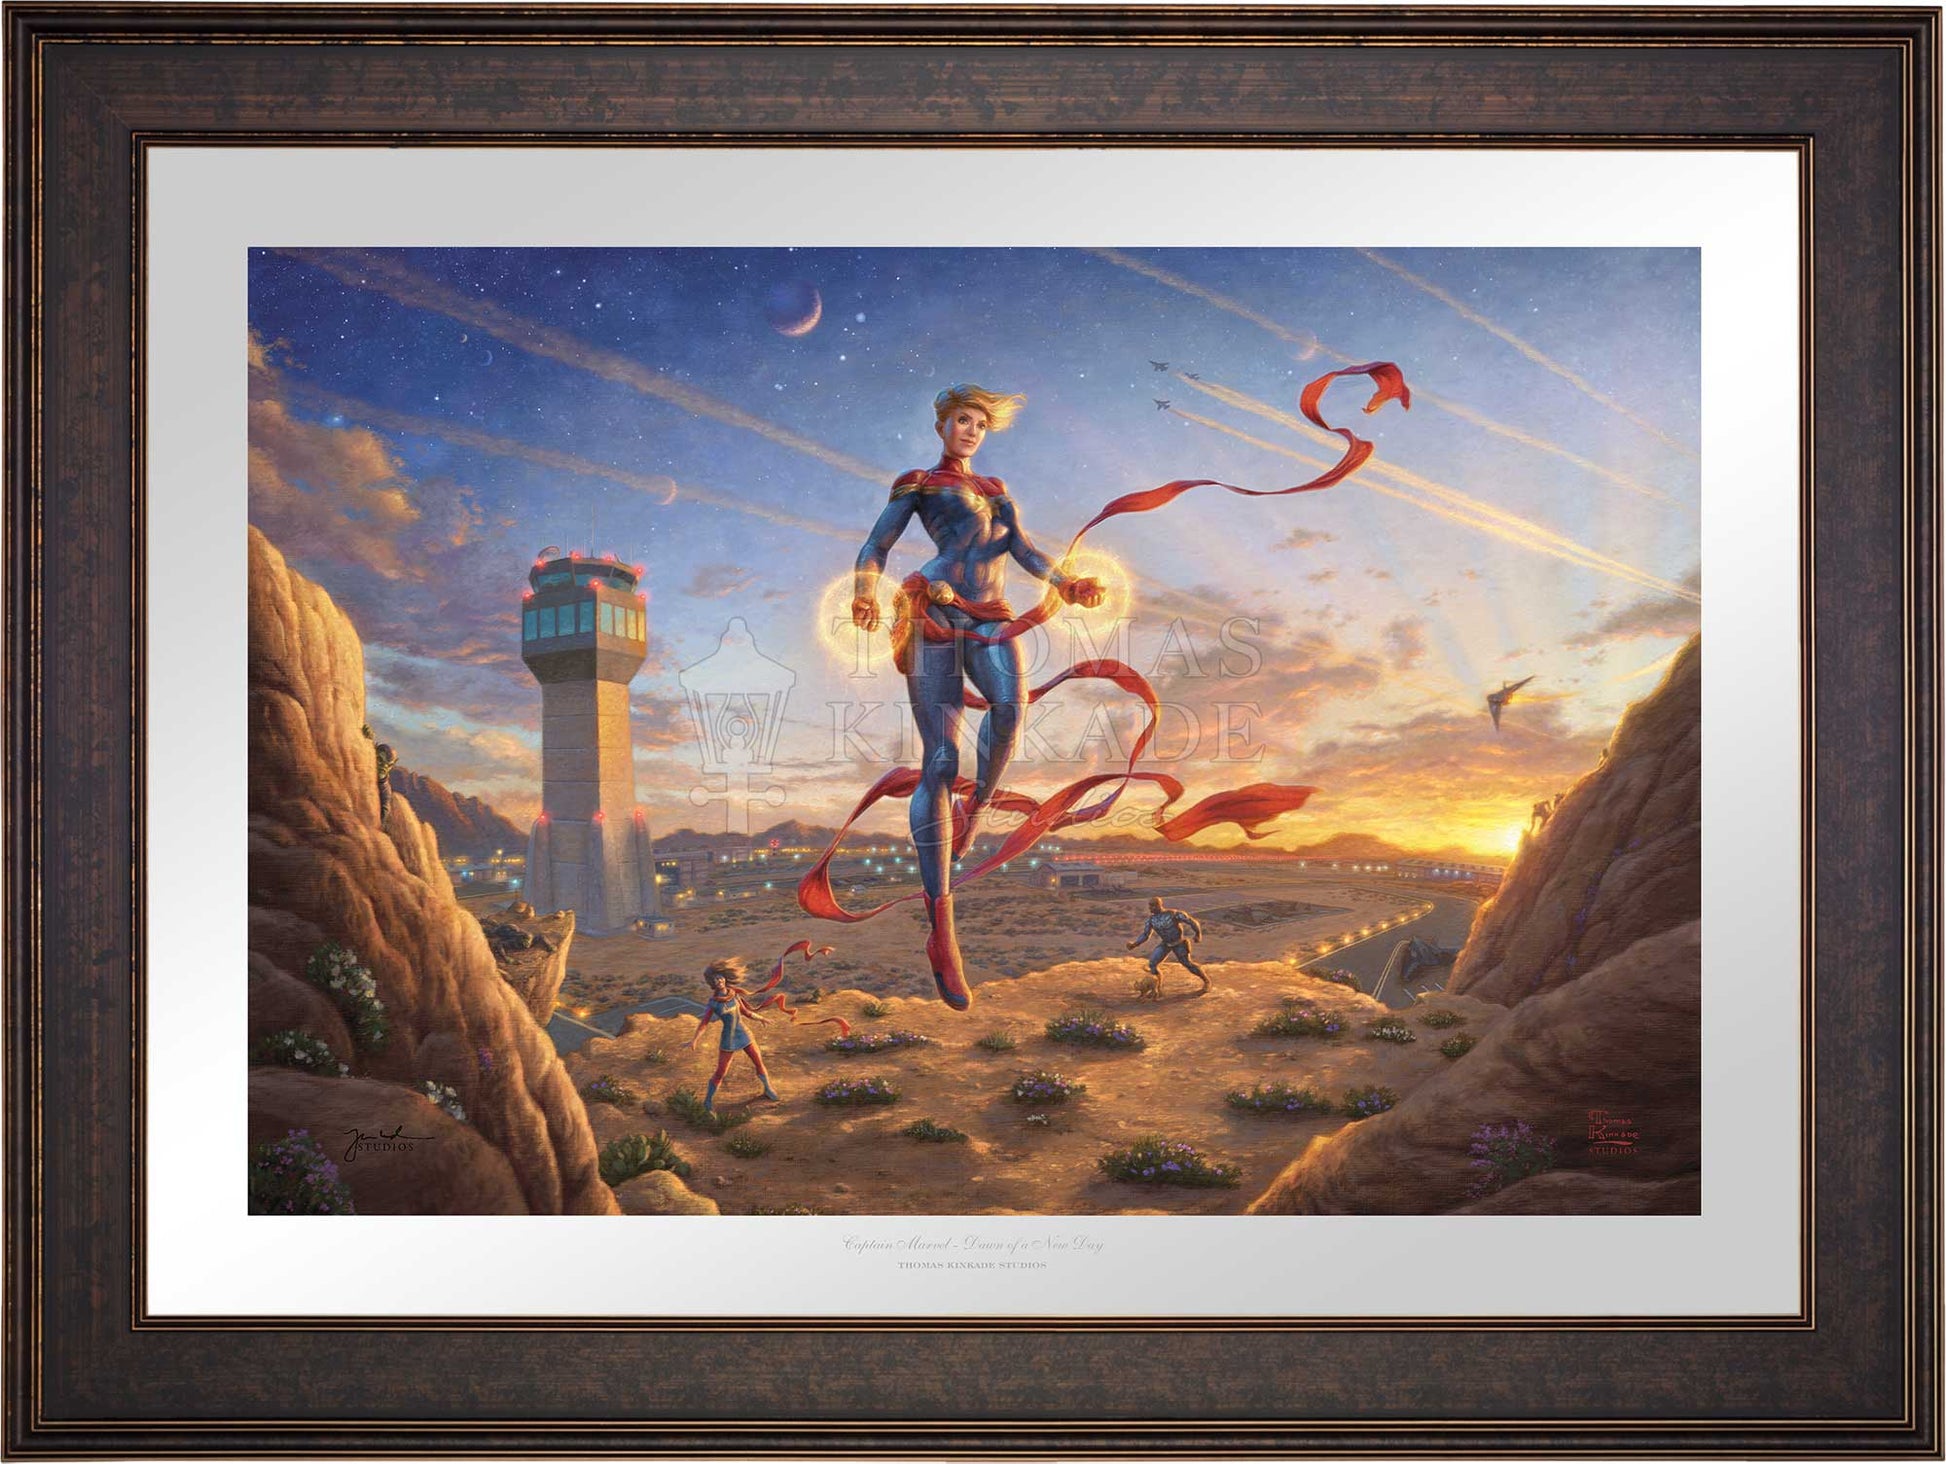 New Posters for 'The Marvels' Take Flight